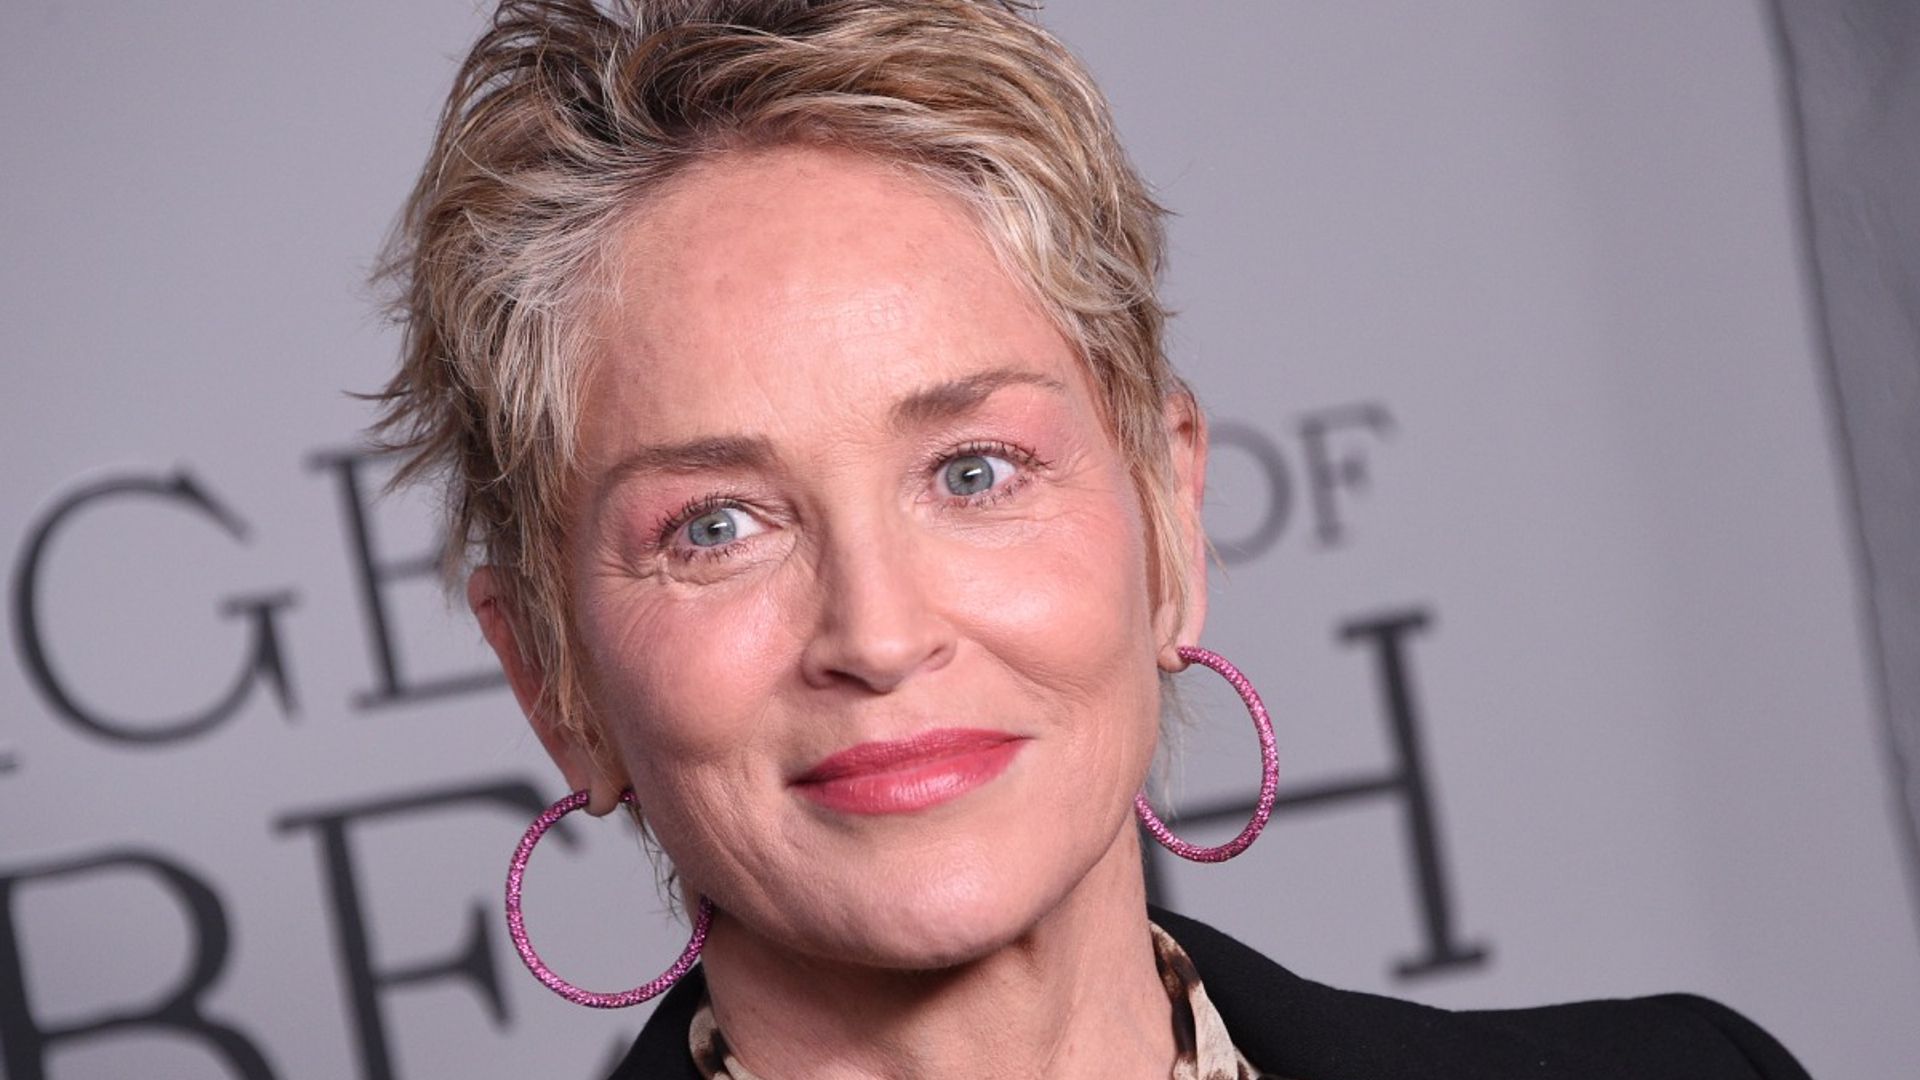 Sharon Stone turns up the heat as she shows off stunning physique in lingerie and heels